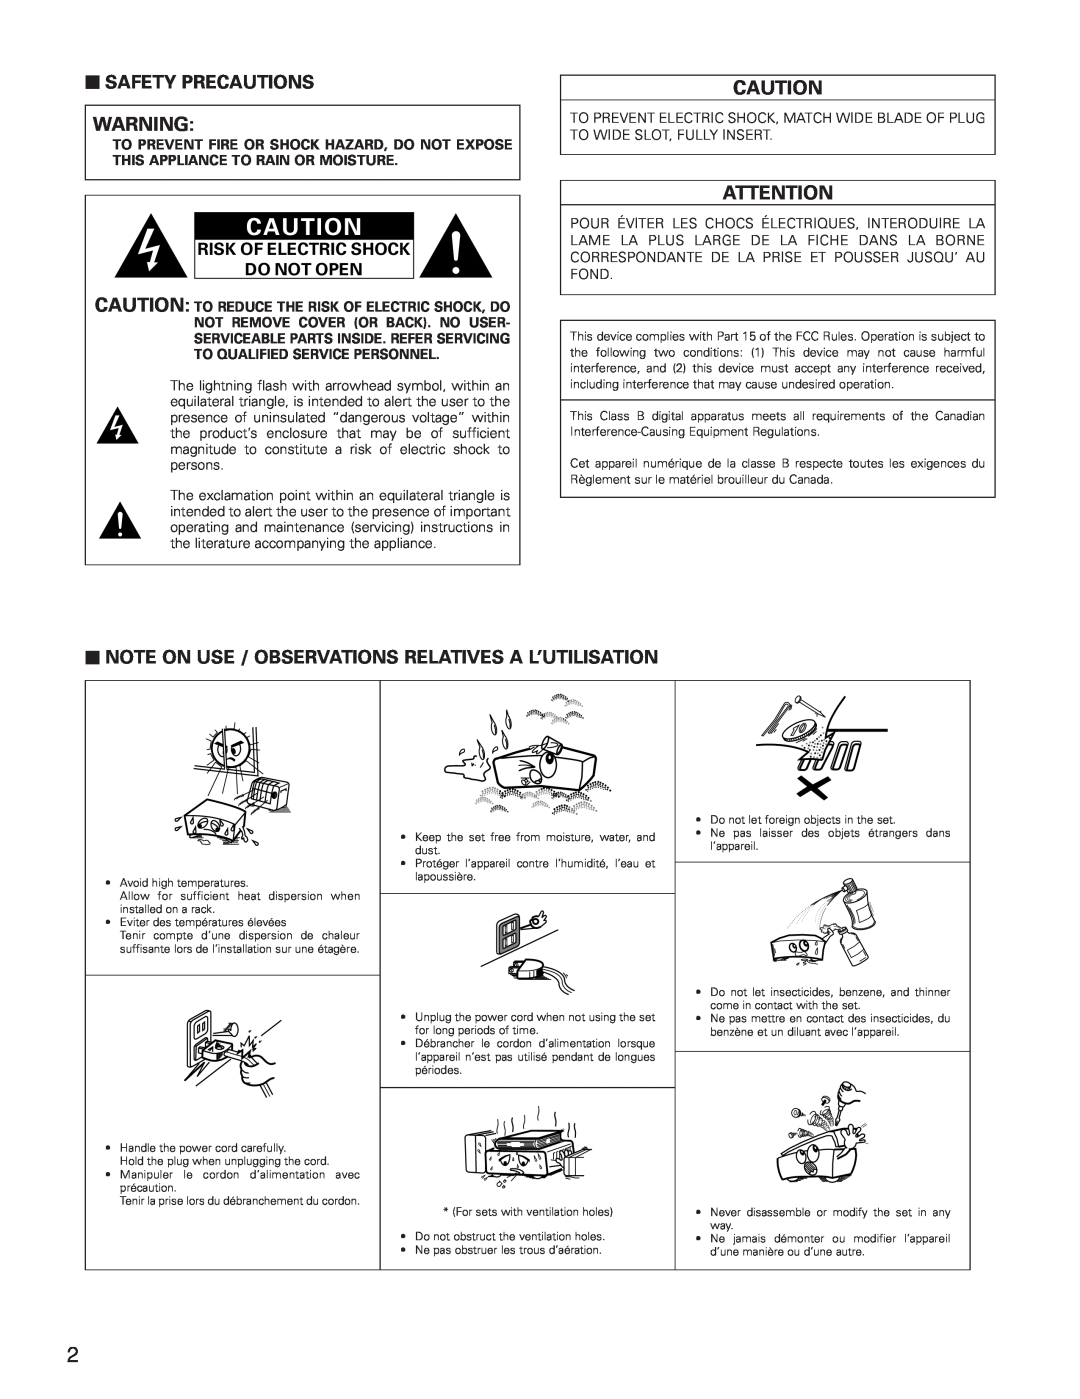 Denon AVR-3801 manual 2SAFETY PRECAUTIONS, Risk Of Electric Shock Do Not Open 